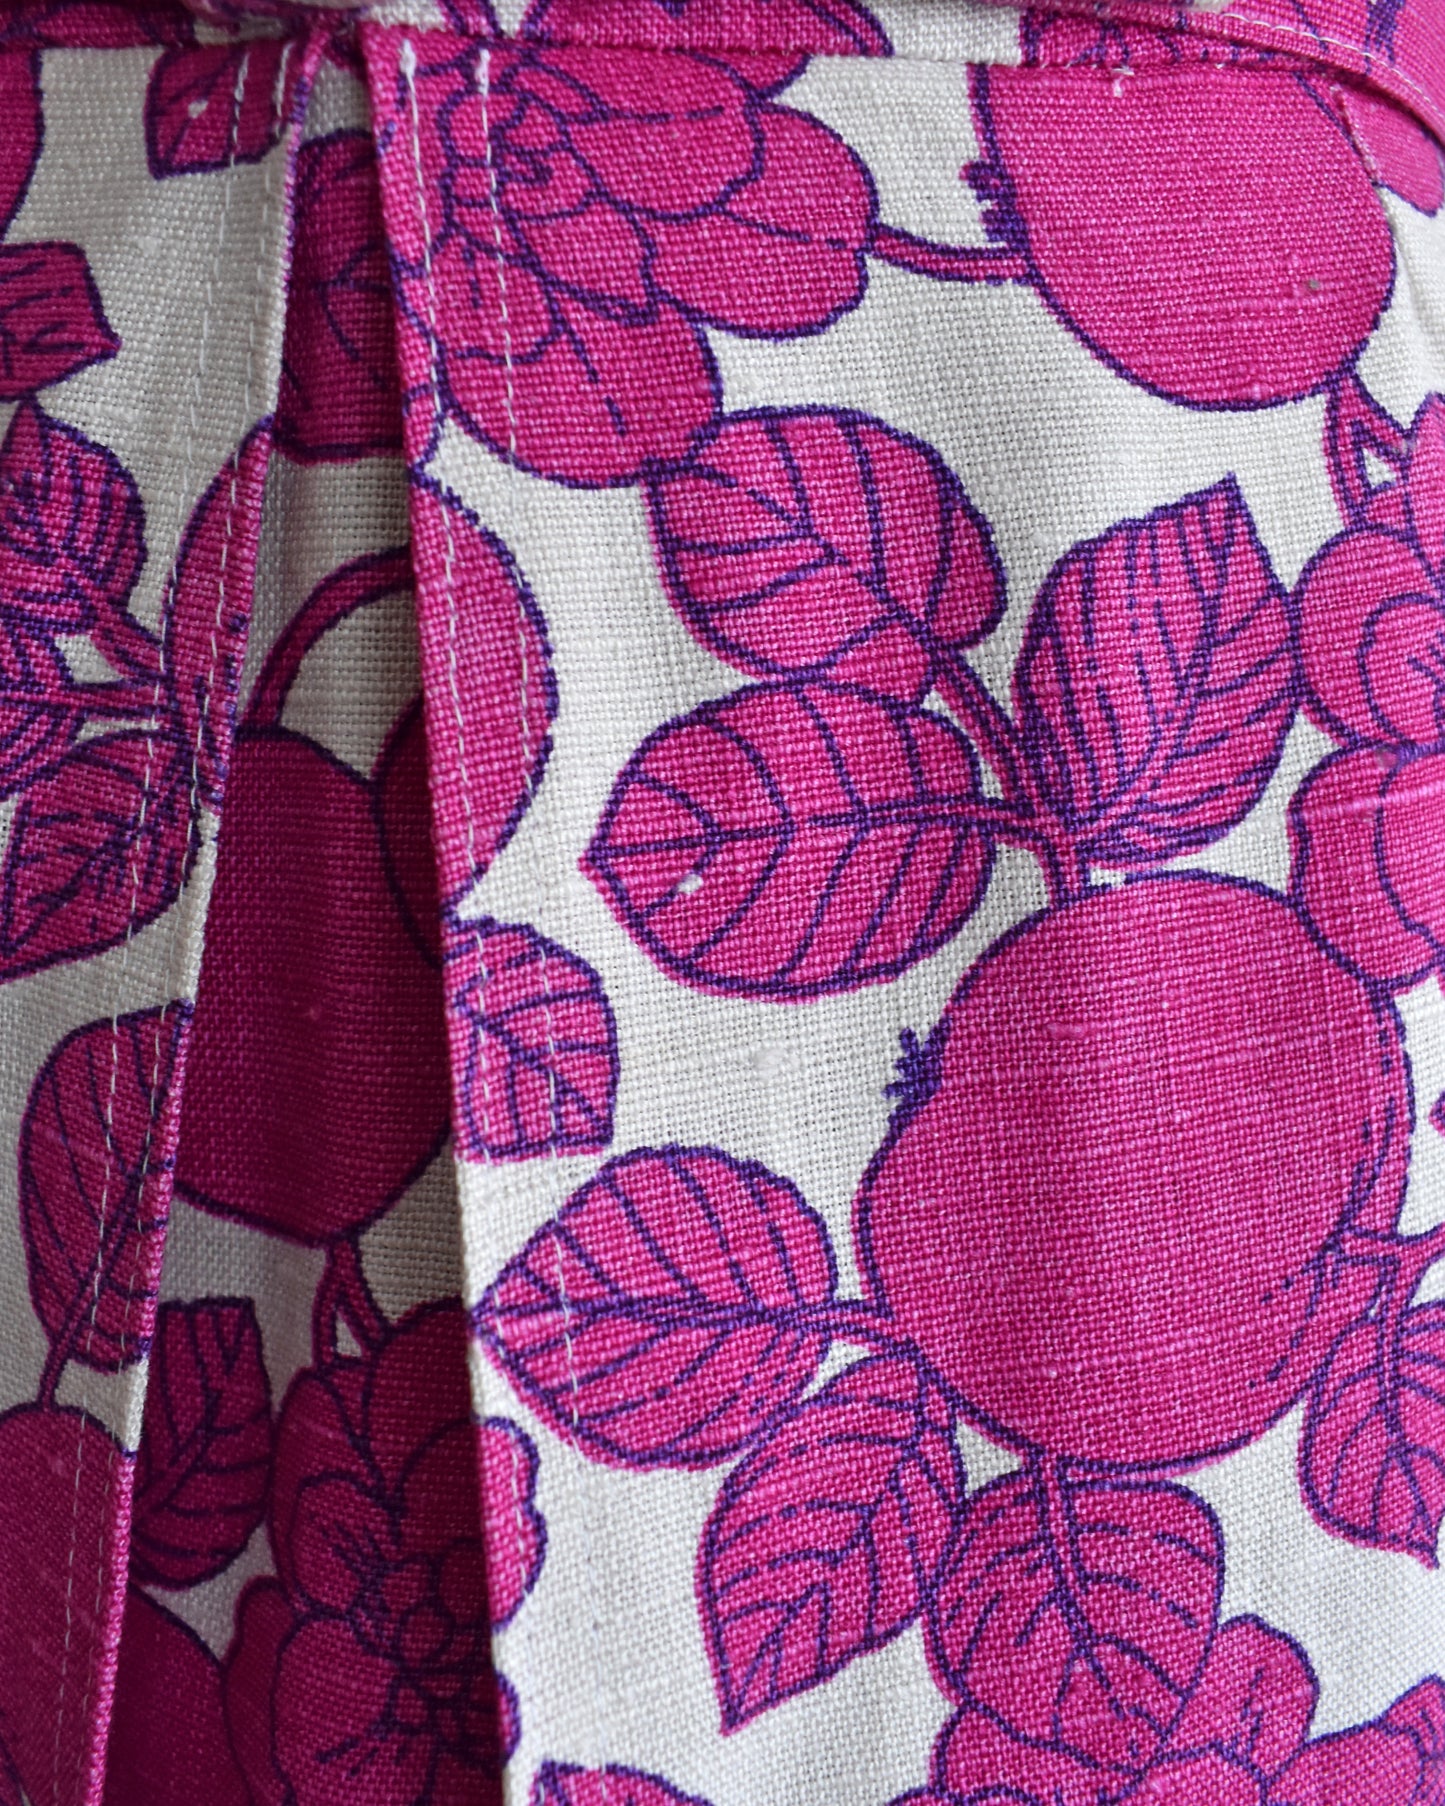 close up of the print on the skirt of the dress